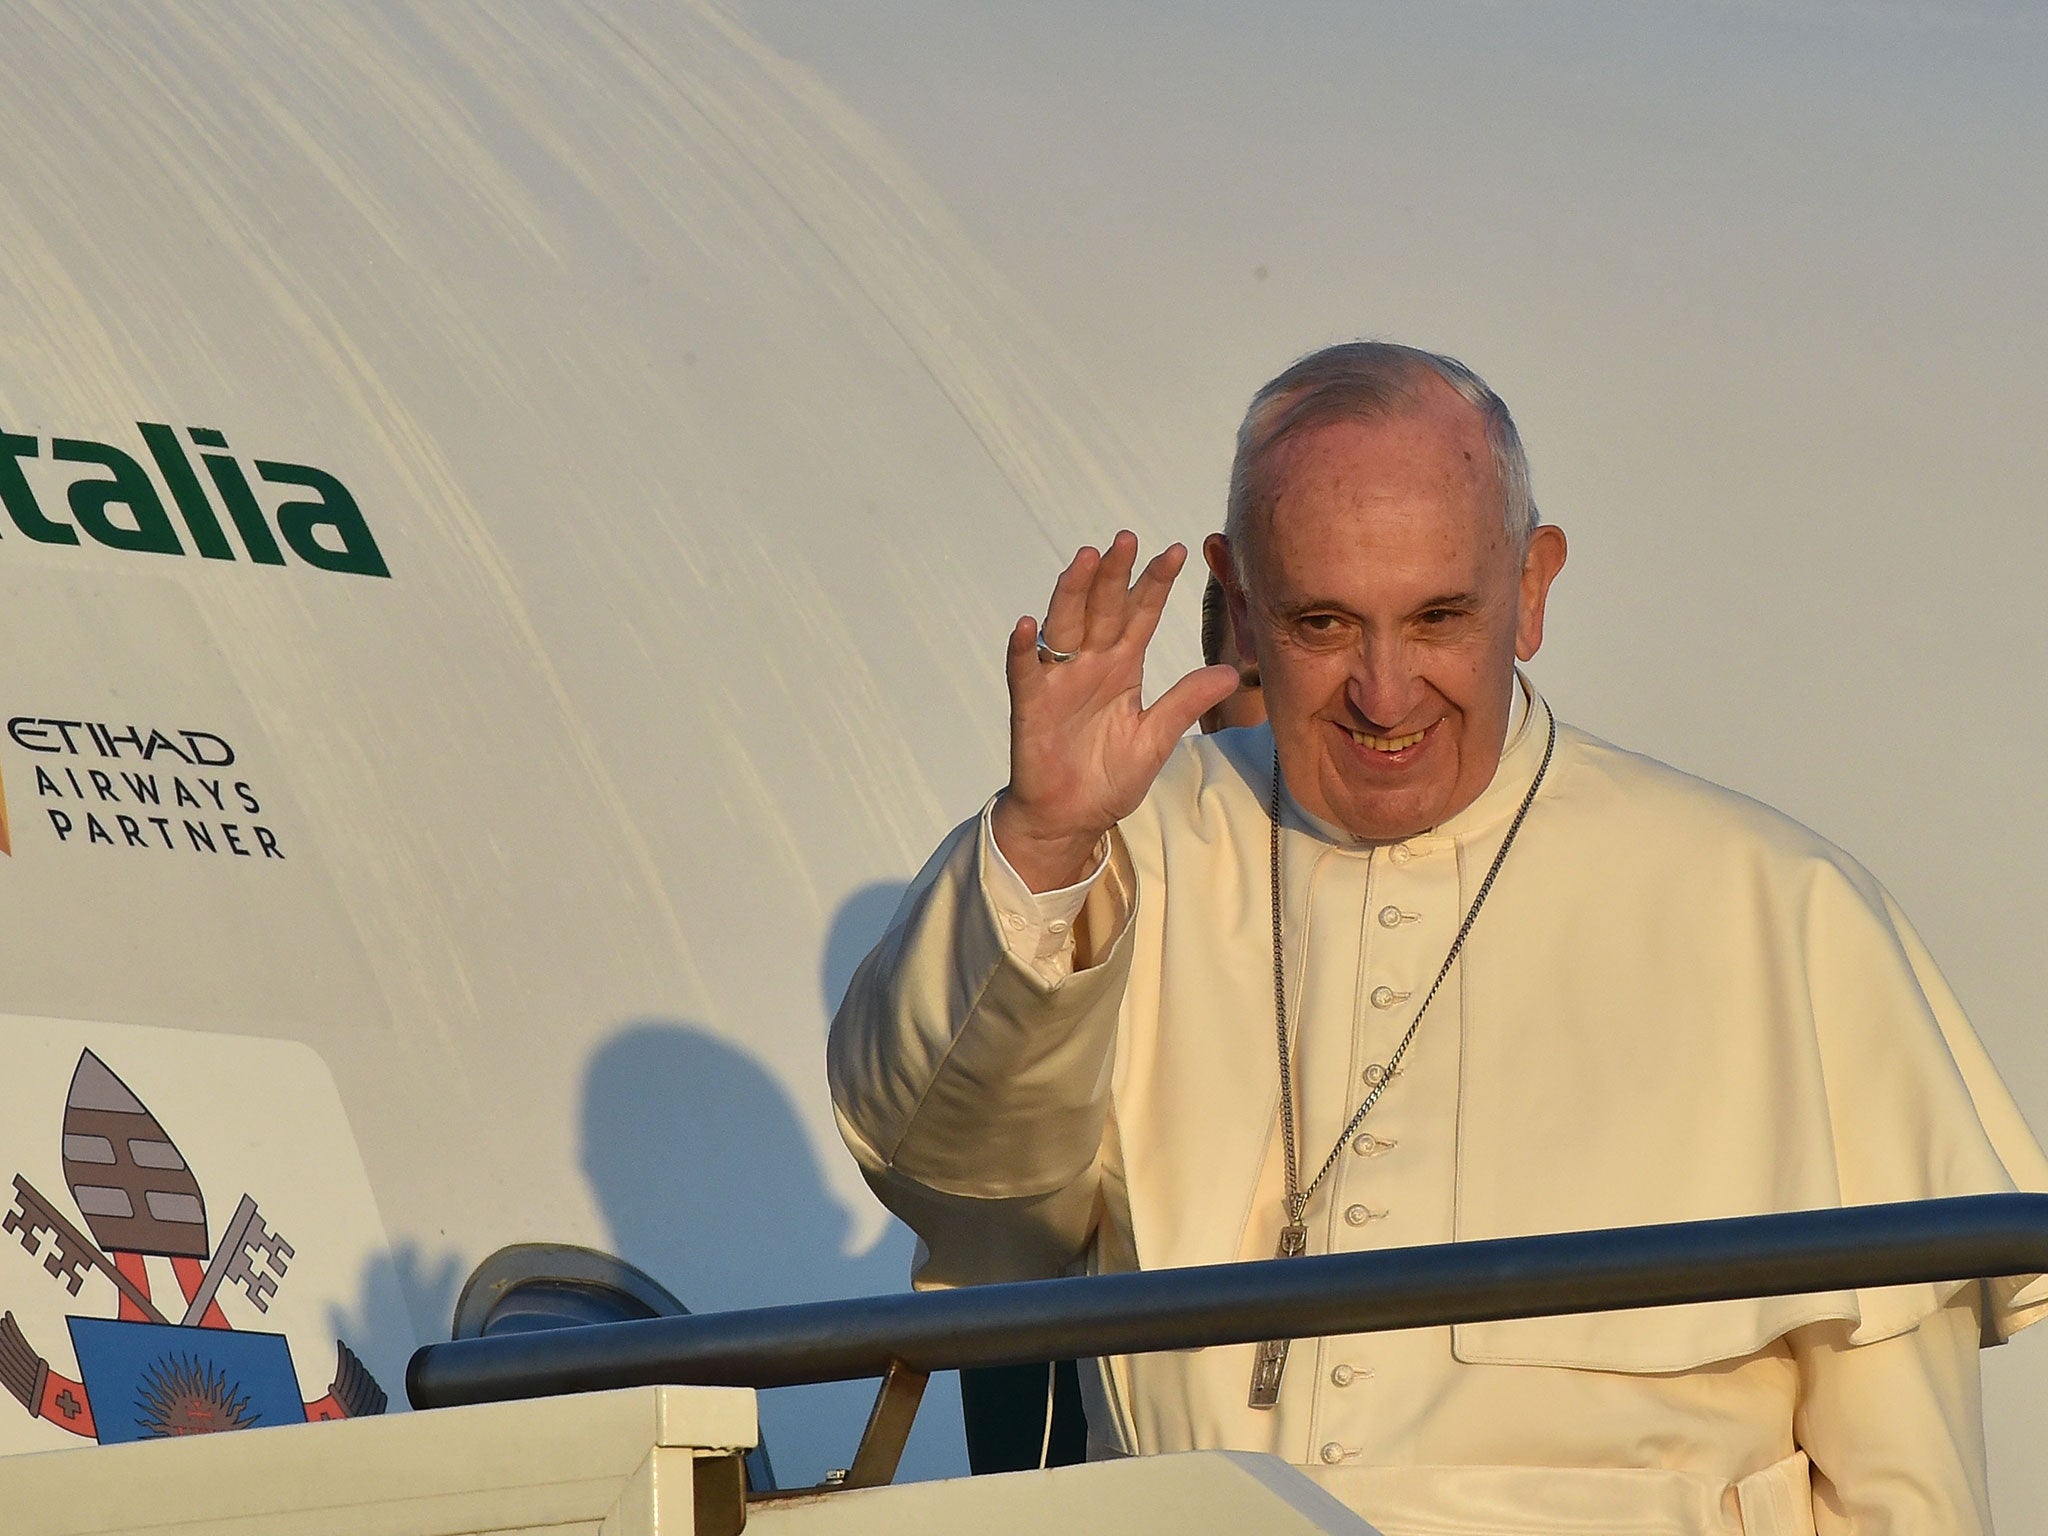 Pope Francis waves to journalists as he boards an plane at Rome's Fiumicino airport, on his way to the Greek island of Lesbos